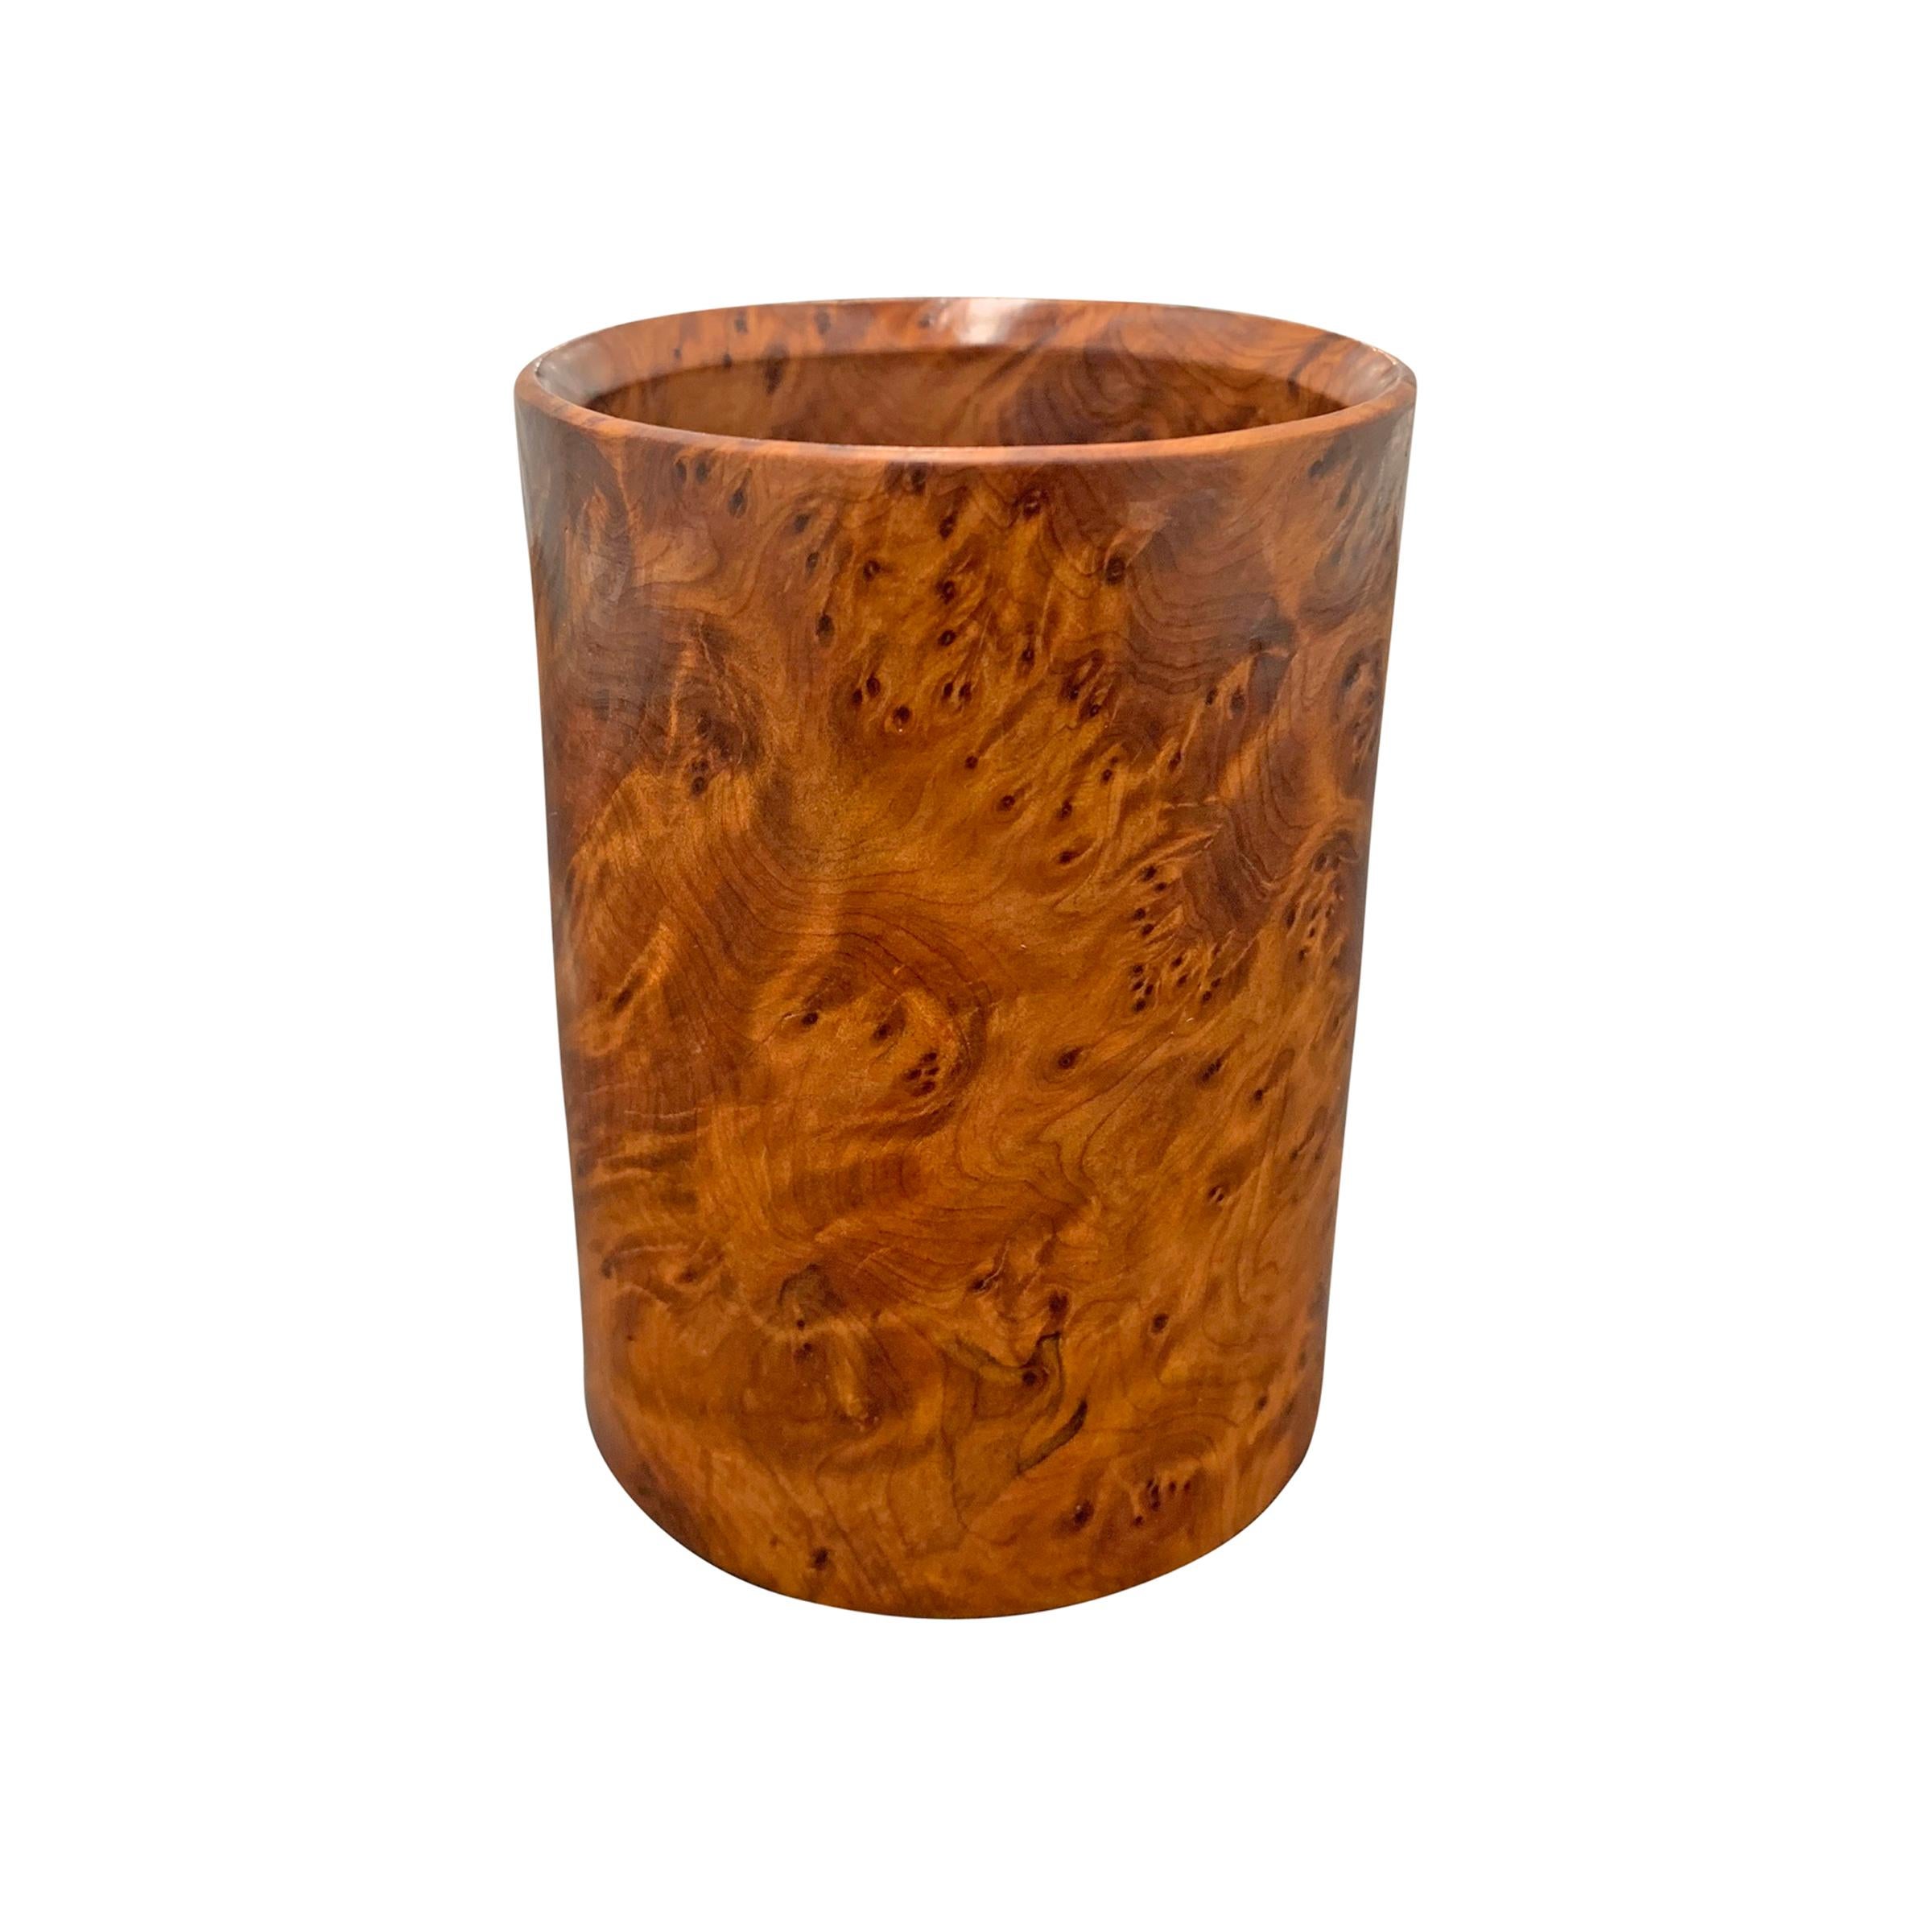 A wonderful mid-20th century burl wood pencil cup with a wildly expressive grain pattern that appears to glow from within!